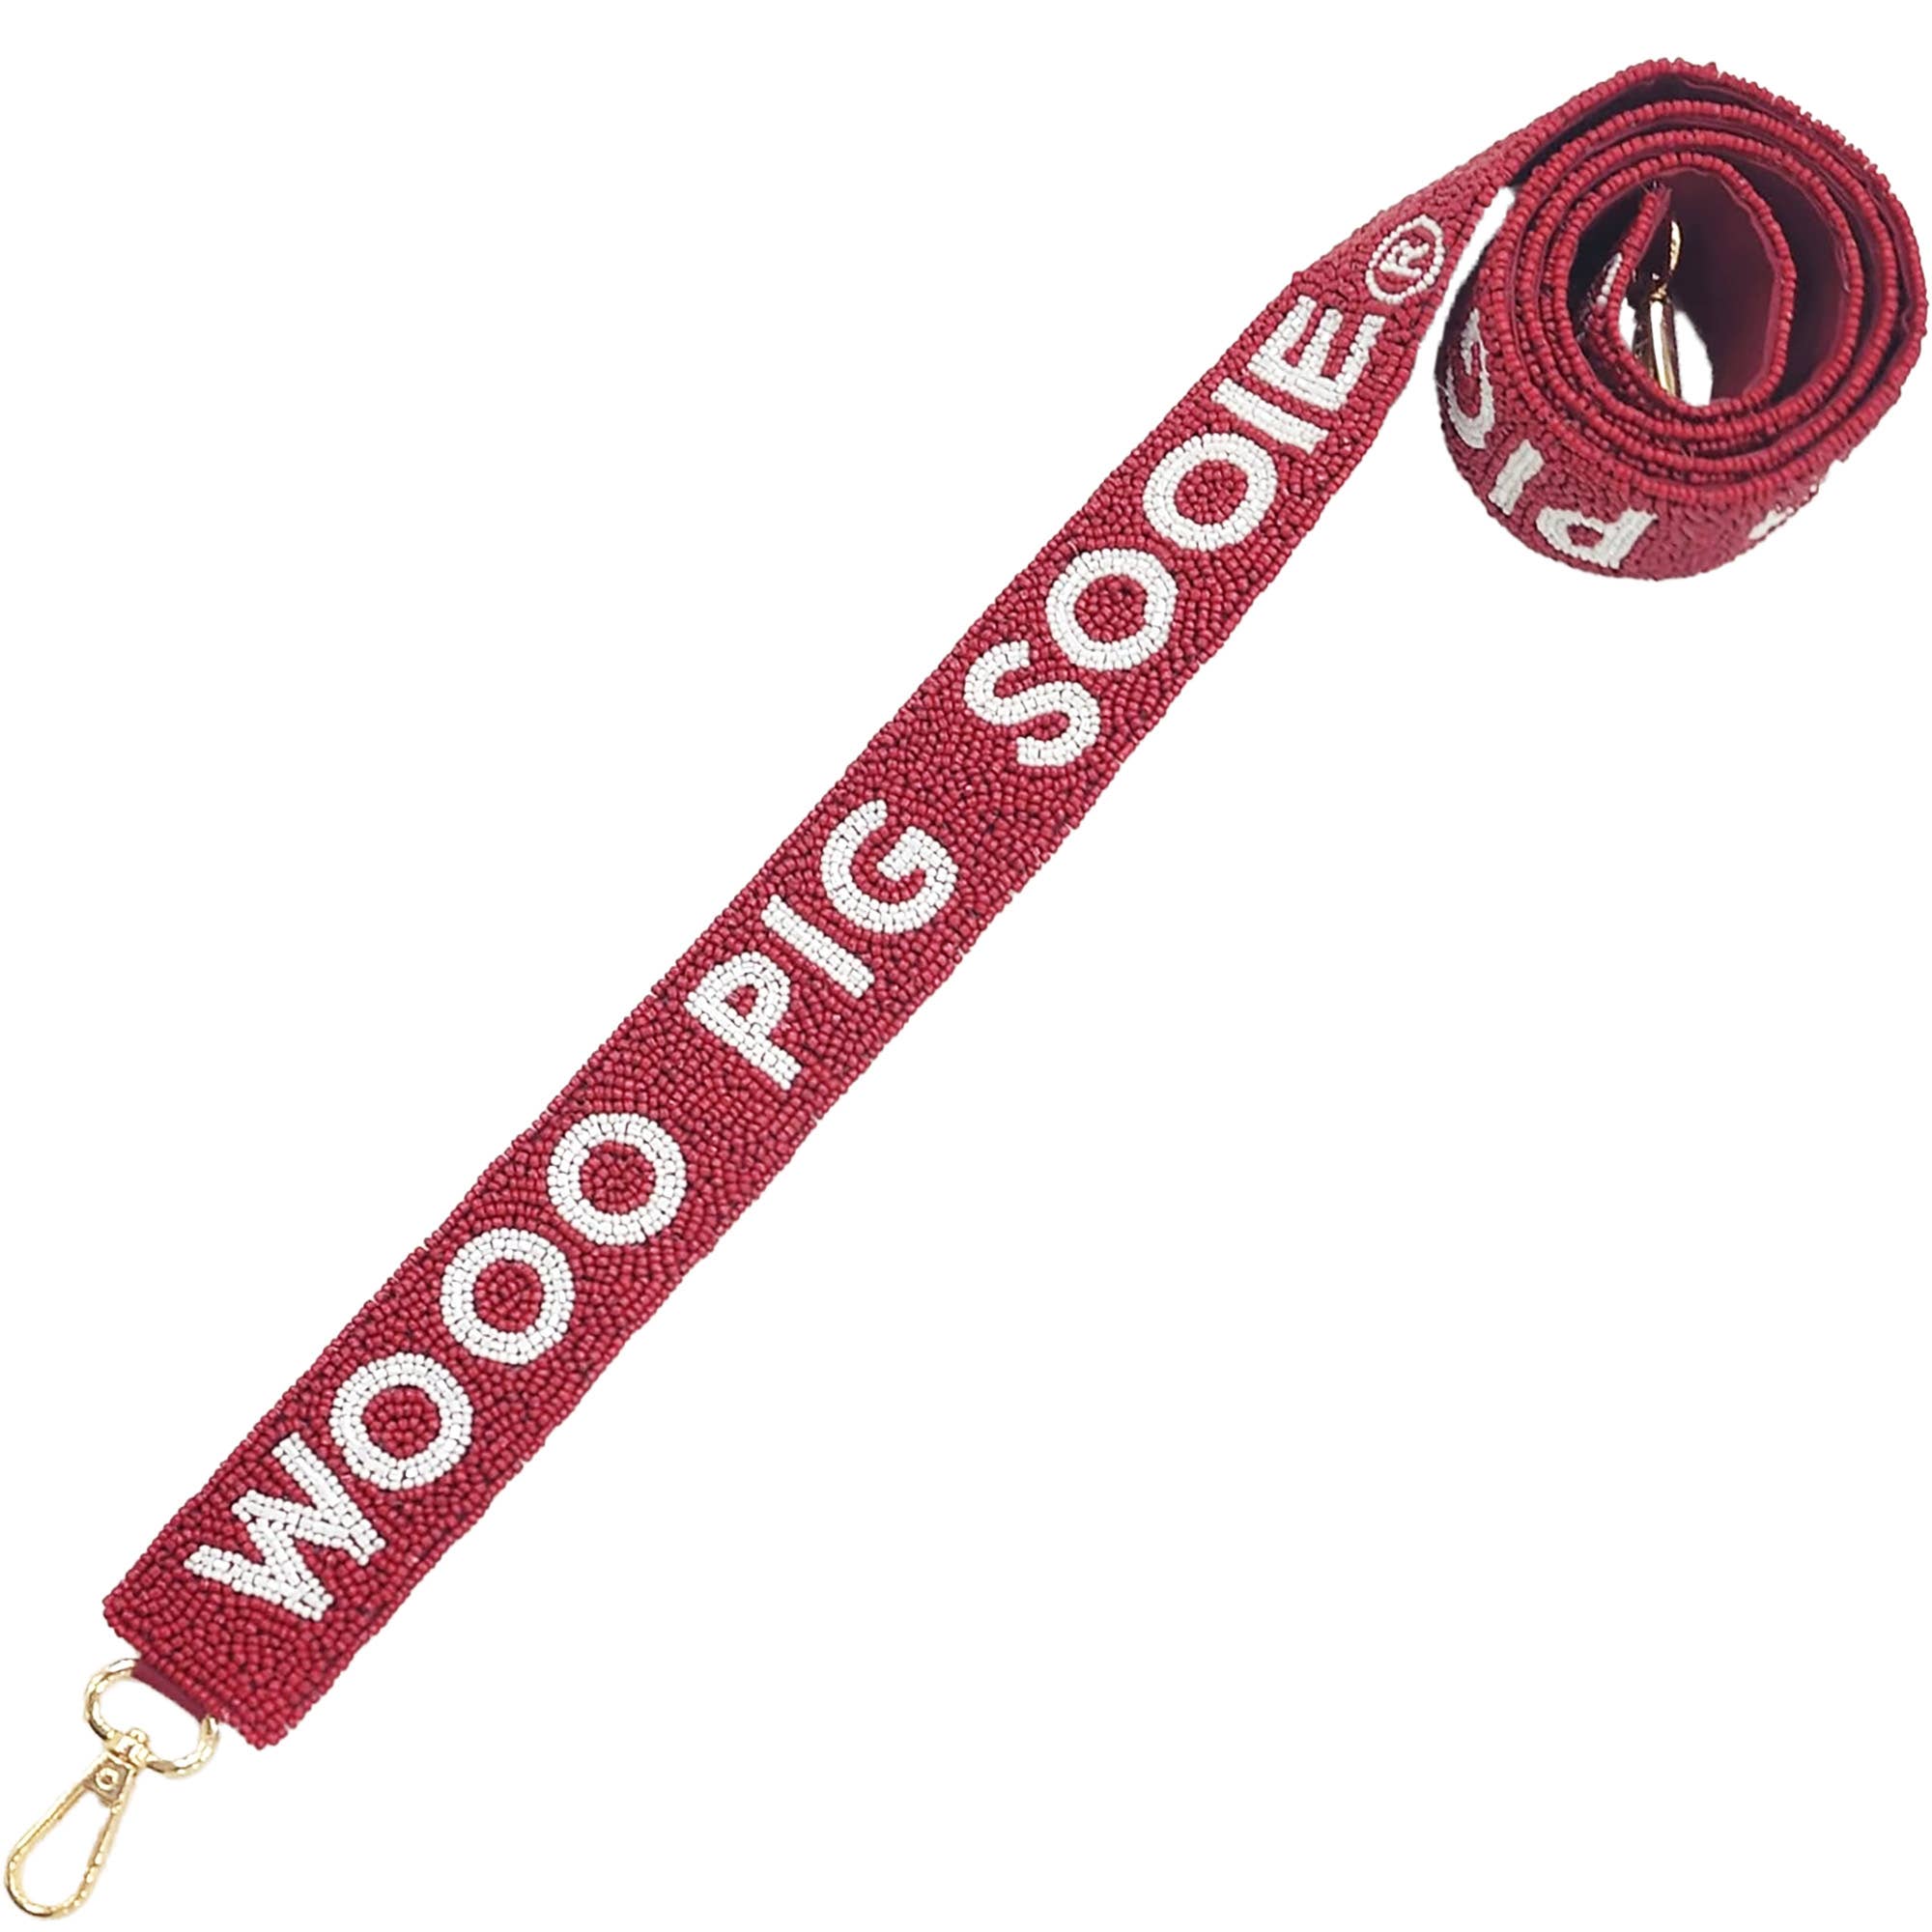 Woo Pig Sooie Red Beaded Bag Strap - Pizzazz, Inc. - Color Game